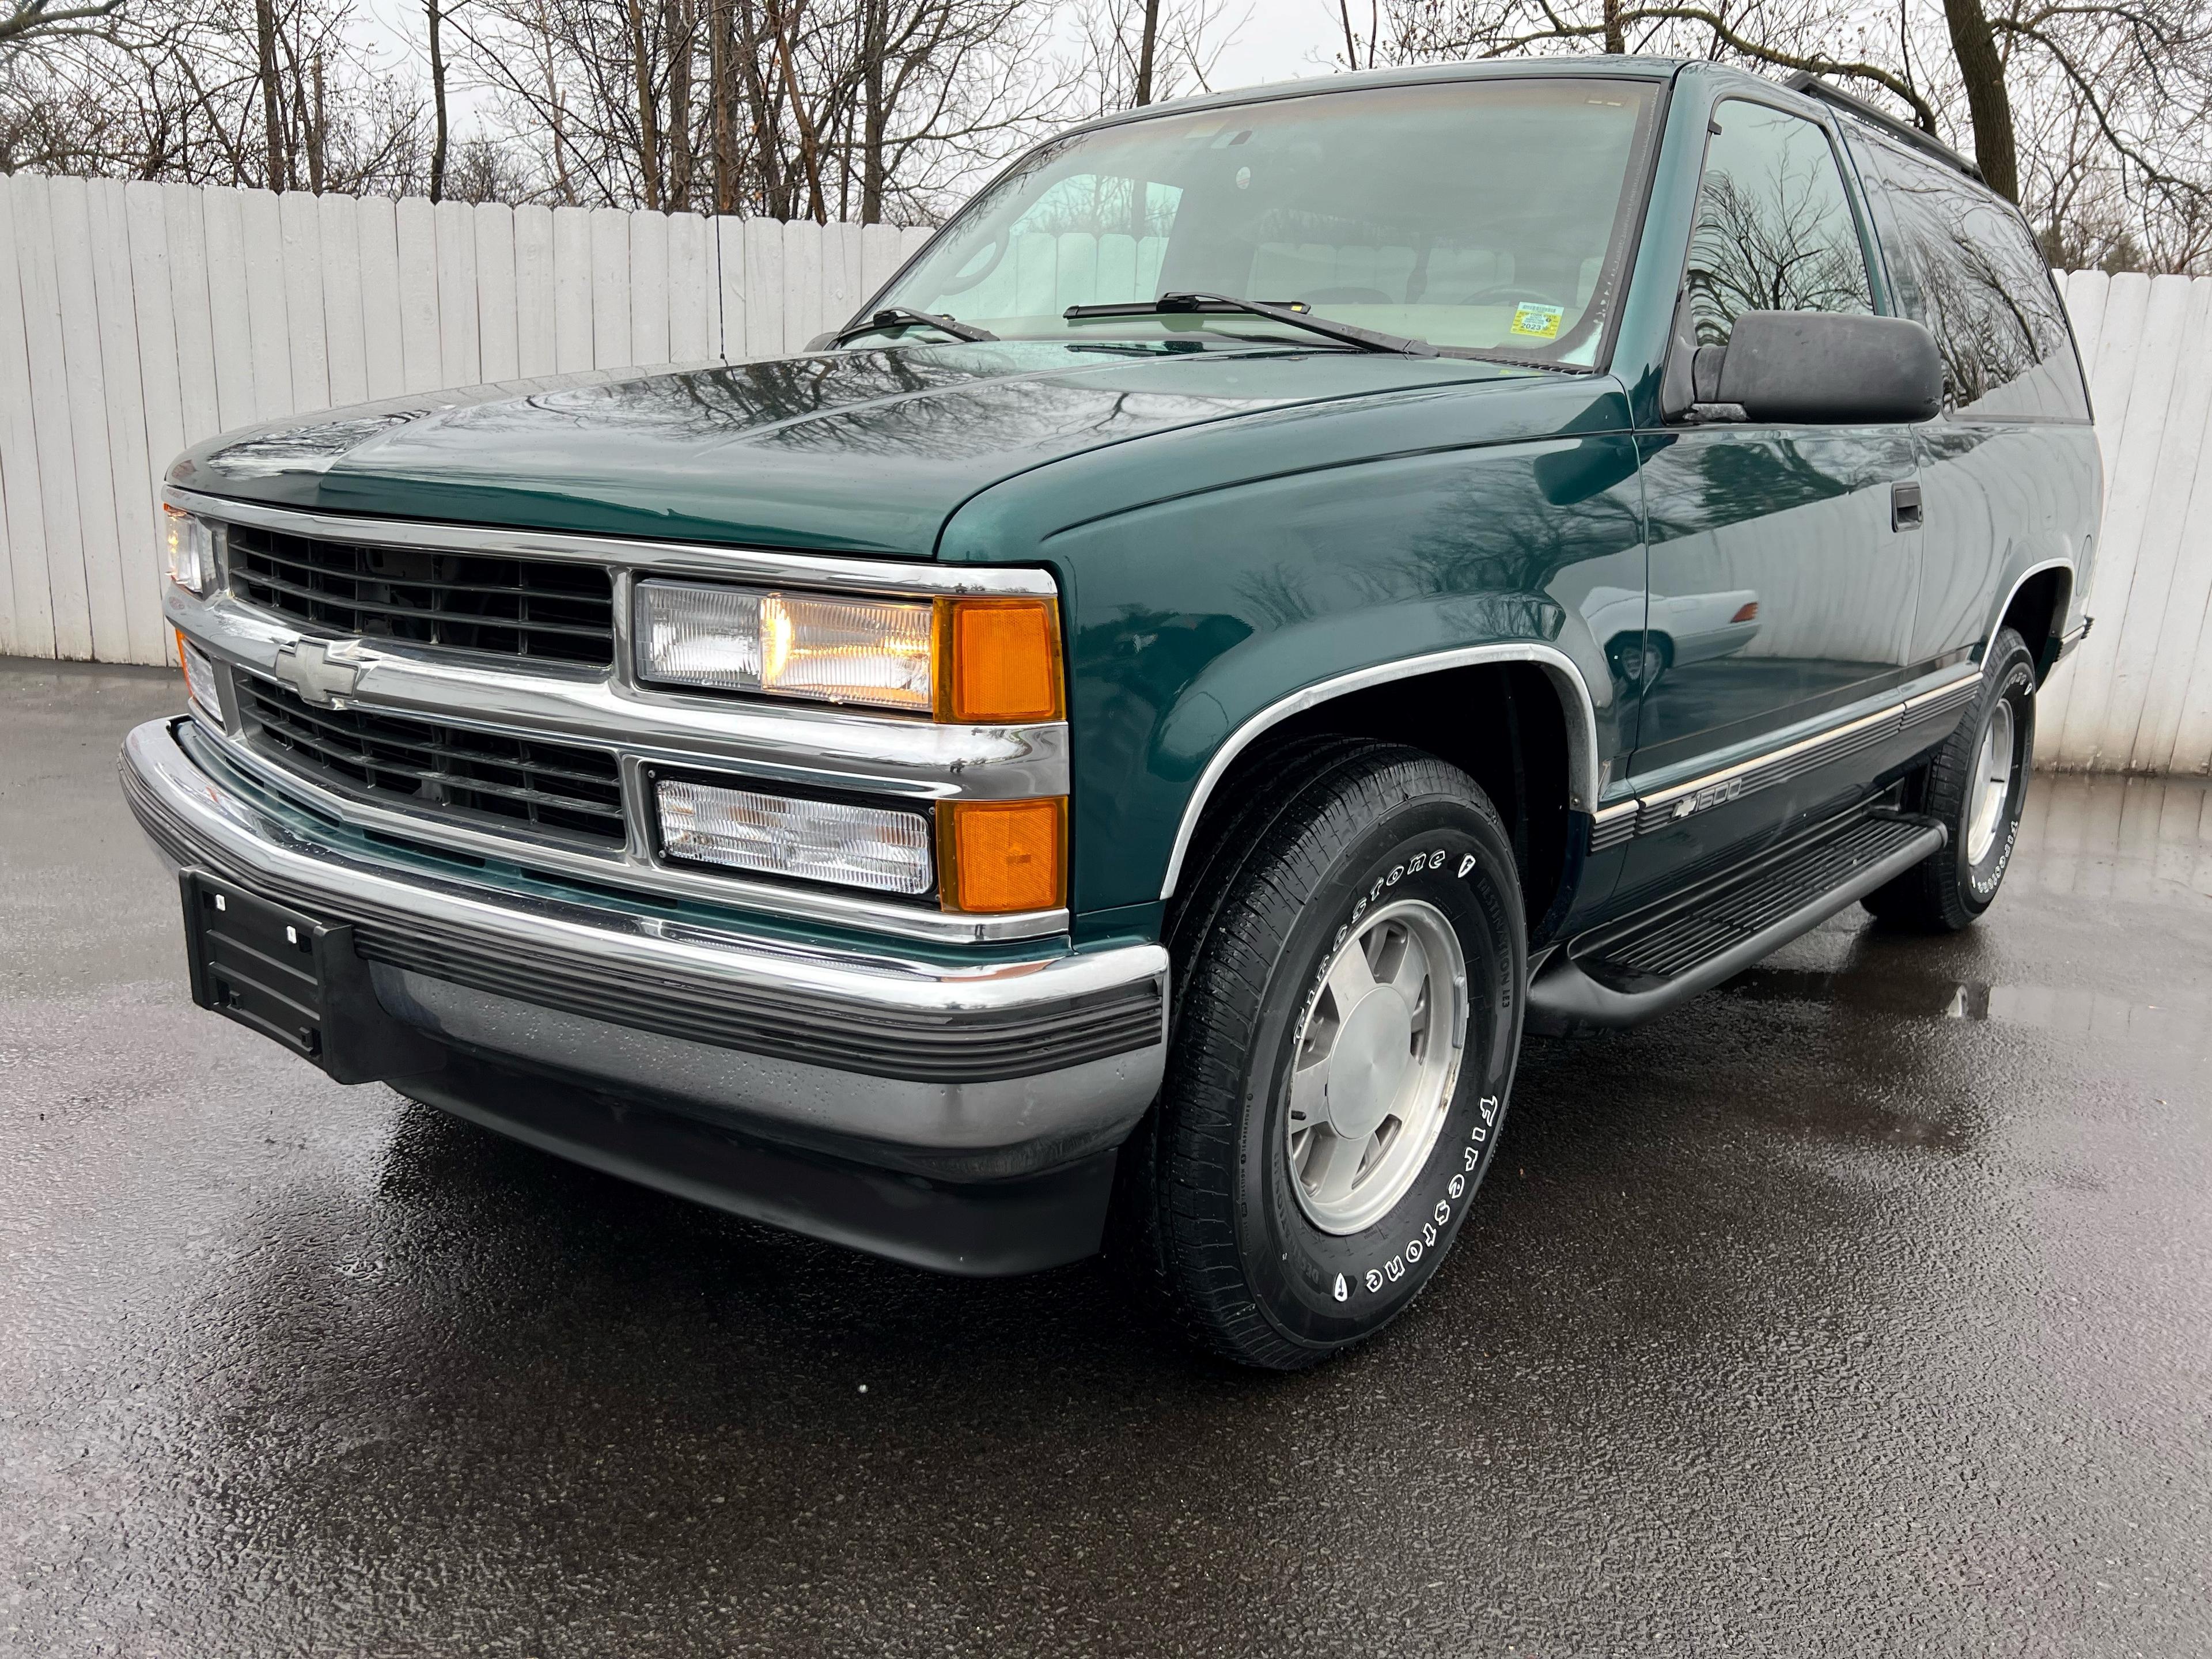 1997 Chevrolet Tahoe LT SUV. 5.7 Liter 8 Cylinder. Automatic. Air Condition